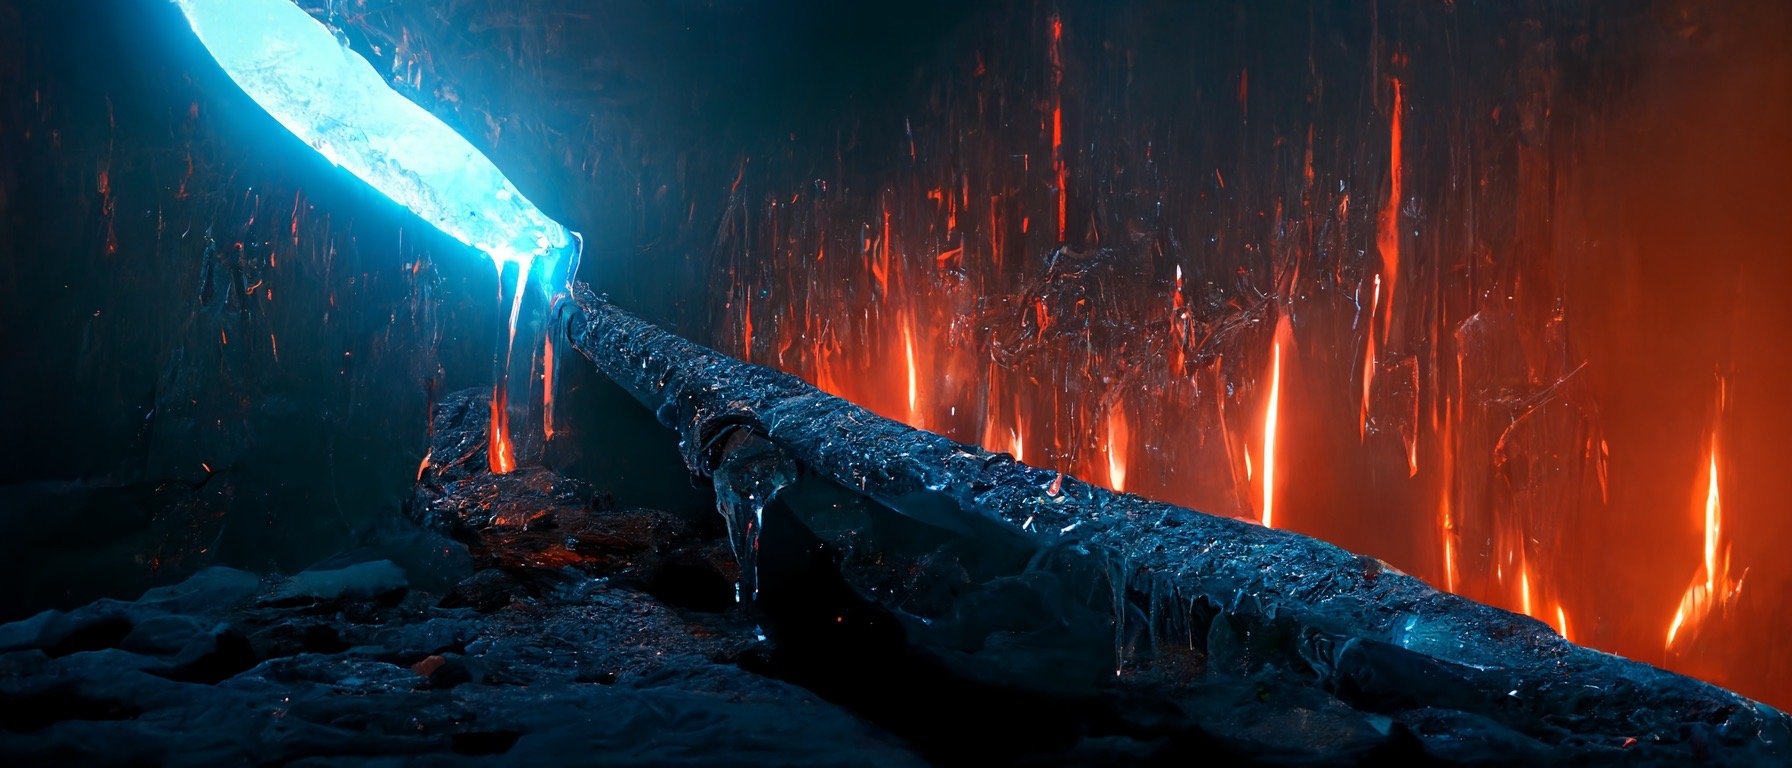 8012a4db-e1f4-4859-a85c-24c584f3ac6f_S3RAPH_frozen_steal_Japanese_sword_katana_as_the_focal_point._in_an_ice_cave_with_reflective_crystals._one_.JPG